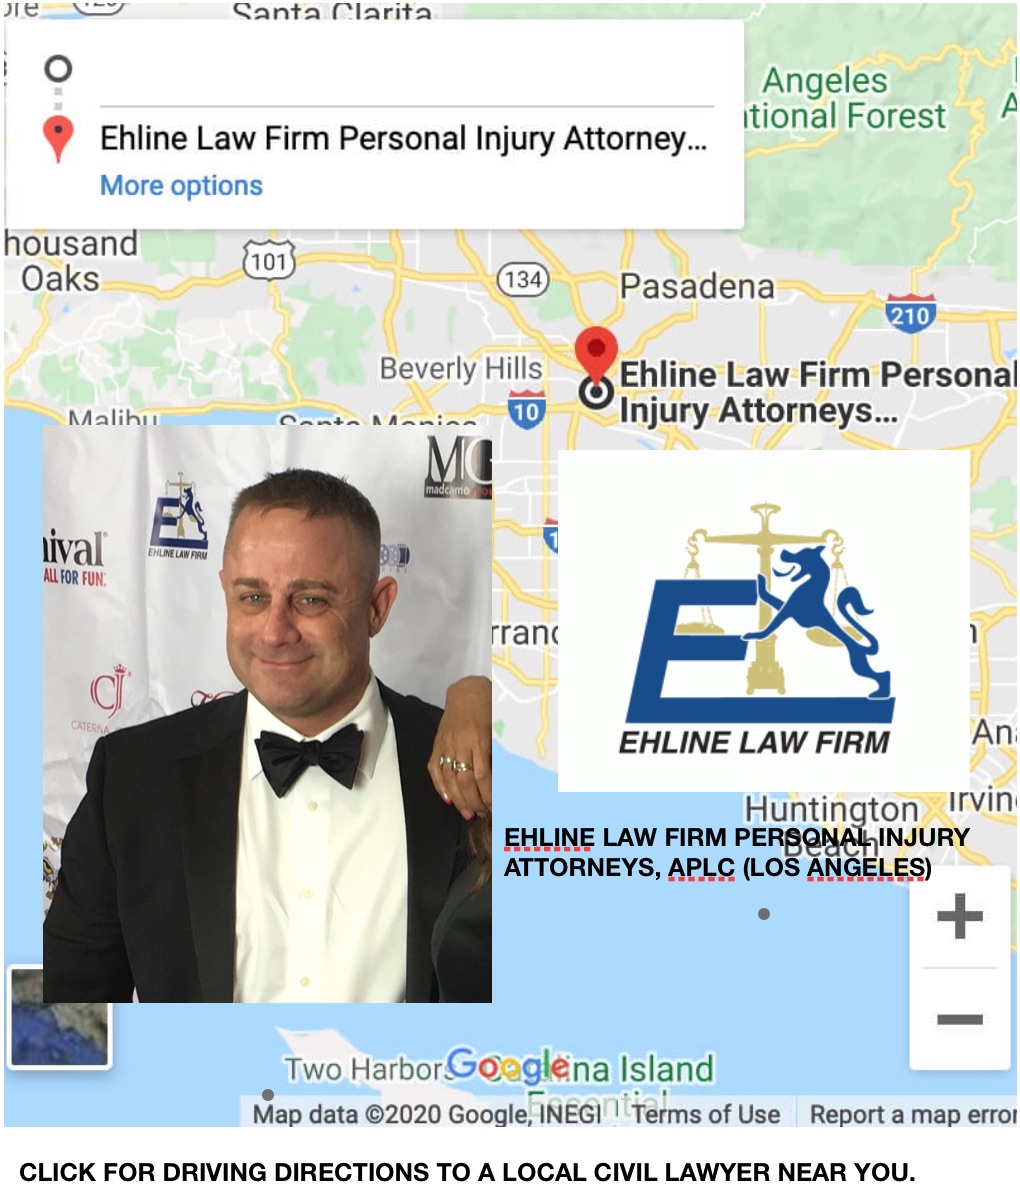 Click here for directions to the Ehline Law Firm Los Angeles accident lawyers near you.